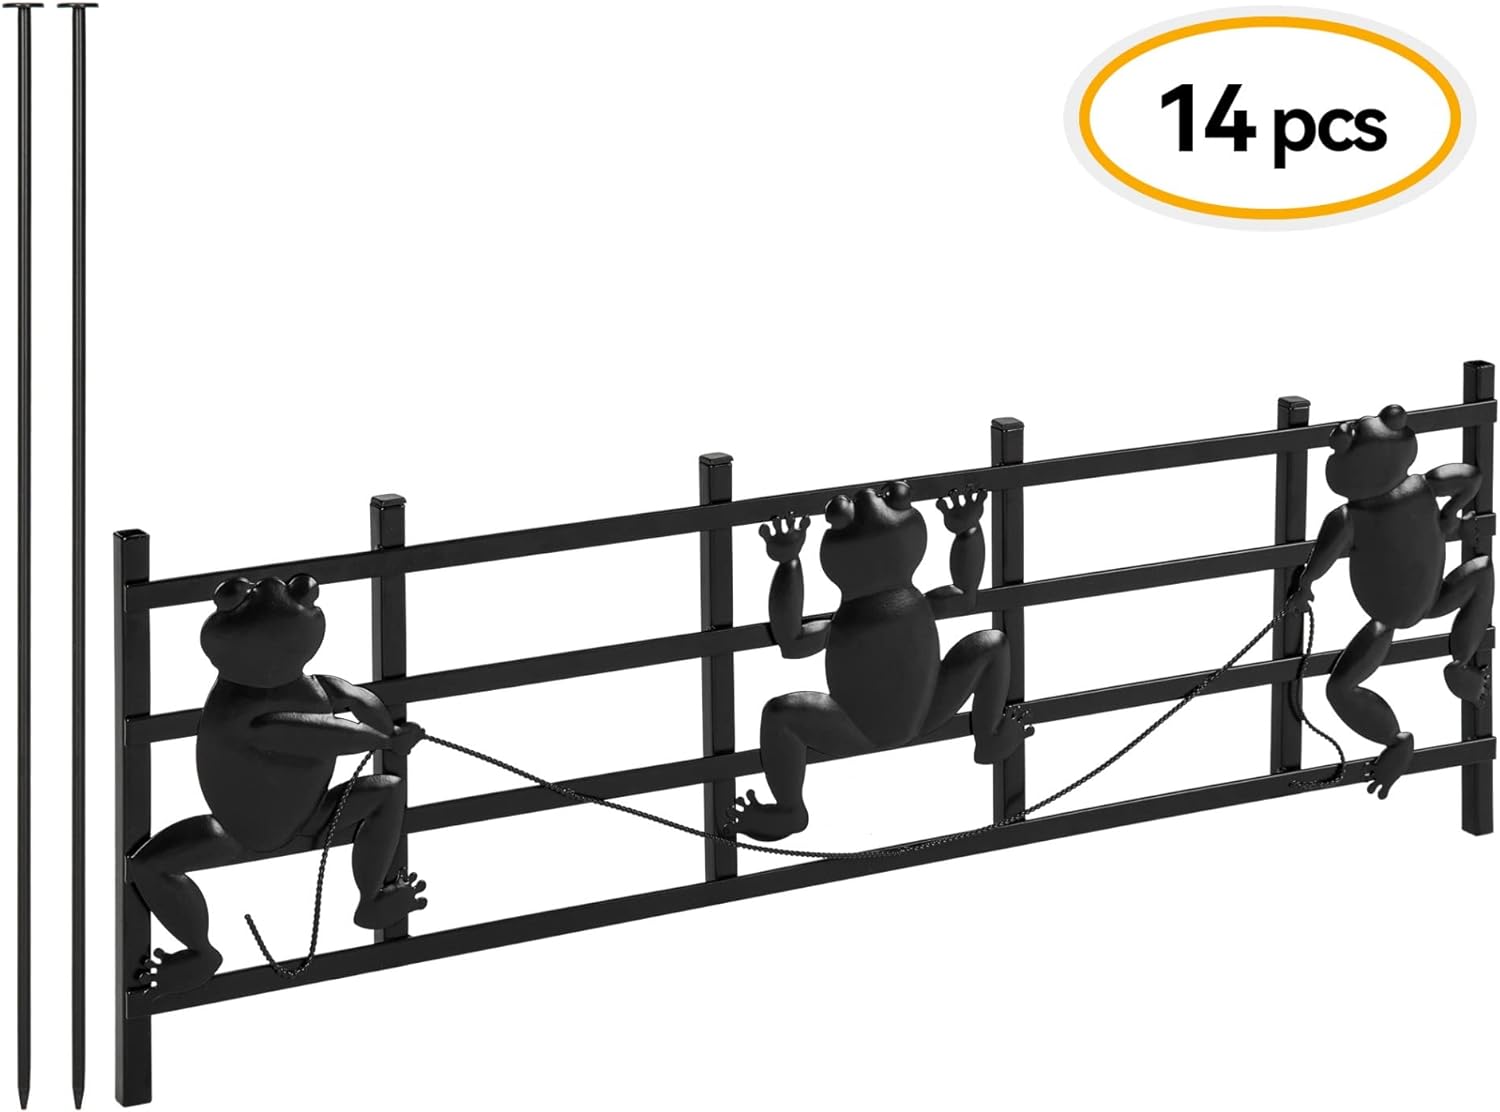 15 Pack Decorative Garden Fence, 8in(H) X 24 in(L) Dog Rabbits Garden Fence, Rustproof Metal Animal Garden Fence Border, Small Animal Barrier Fence for Outdoor Patio (Frog-Black)